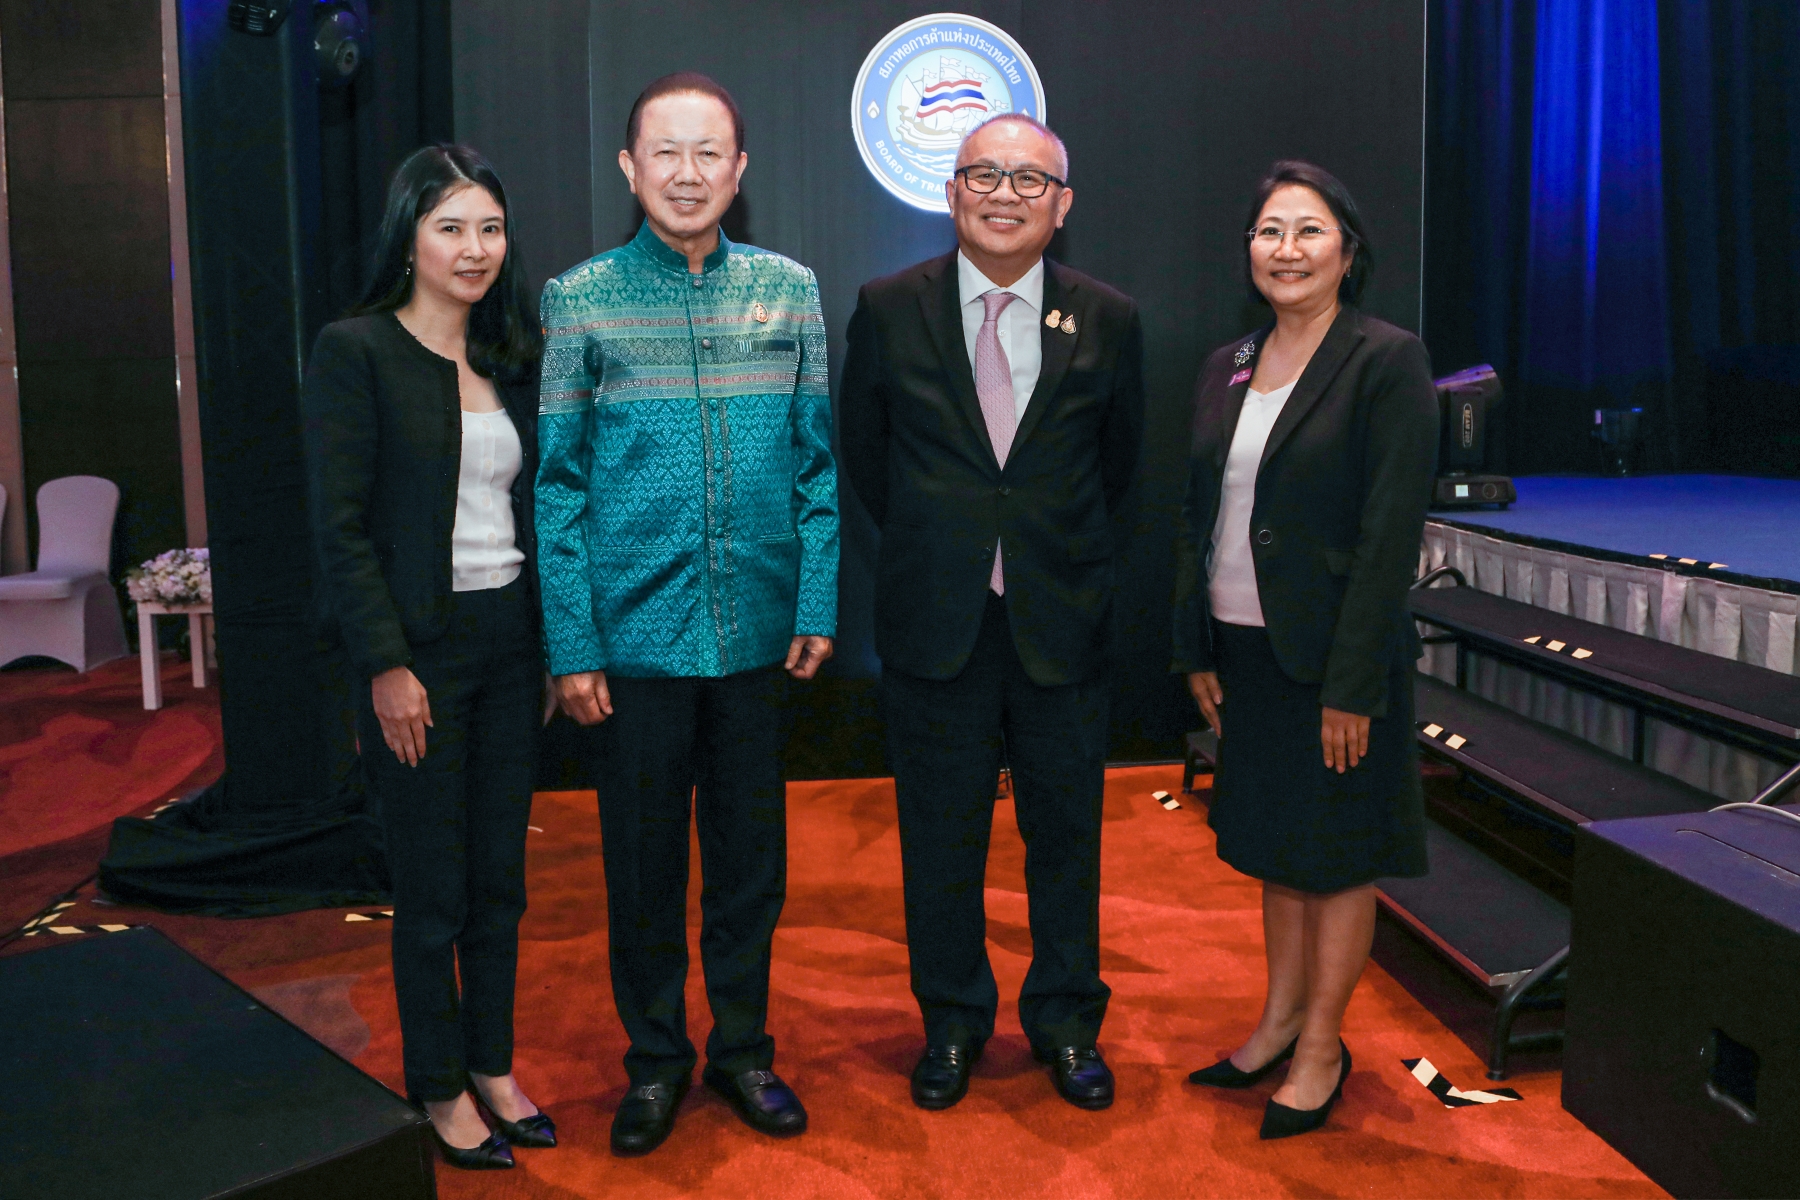 EXIM Thailand Joins Board of Trade of Thailand’s  “Enhance the Dots” Gala Dinner